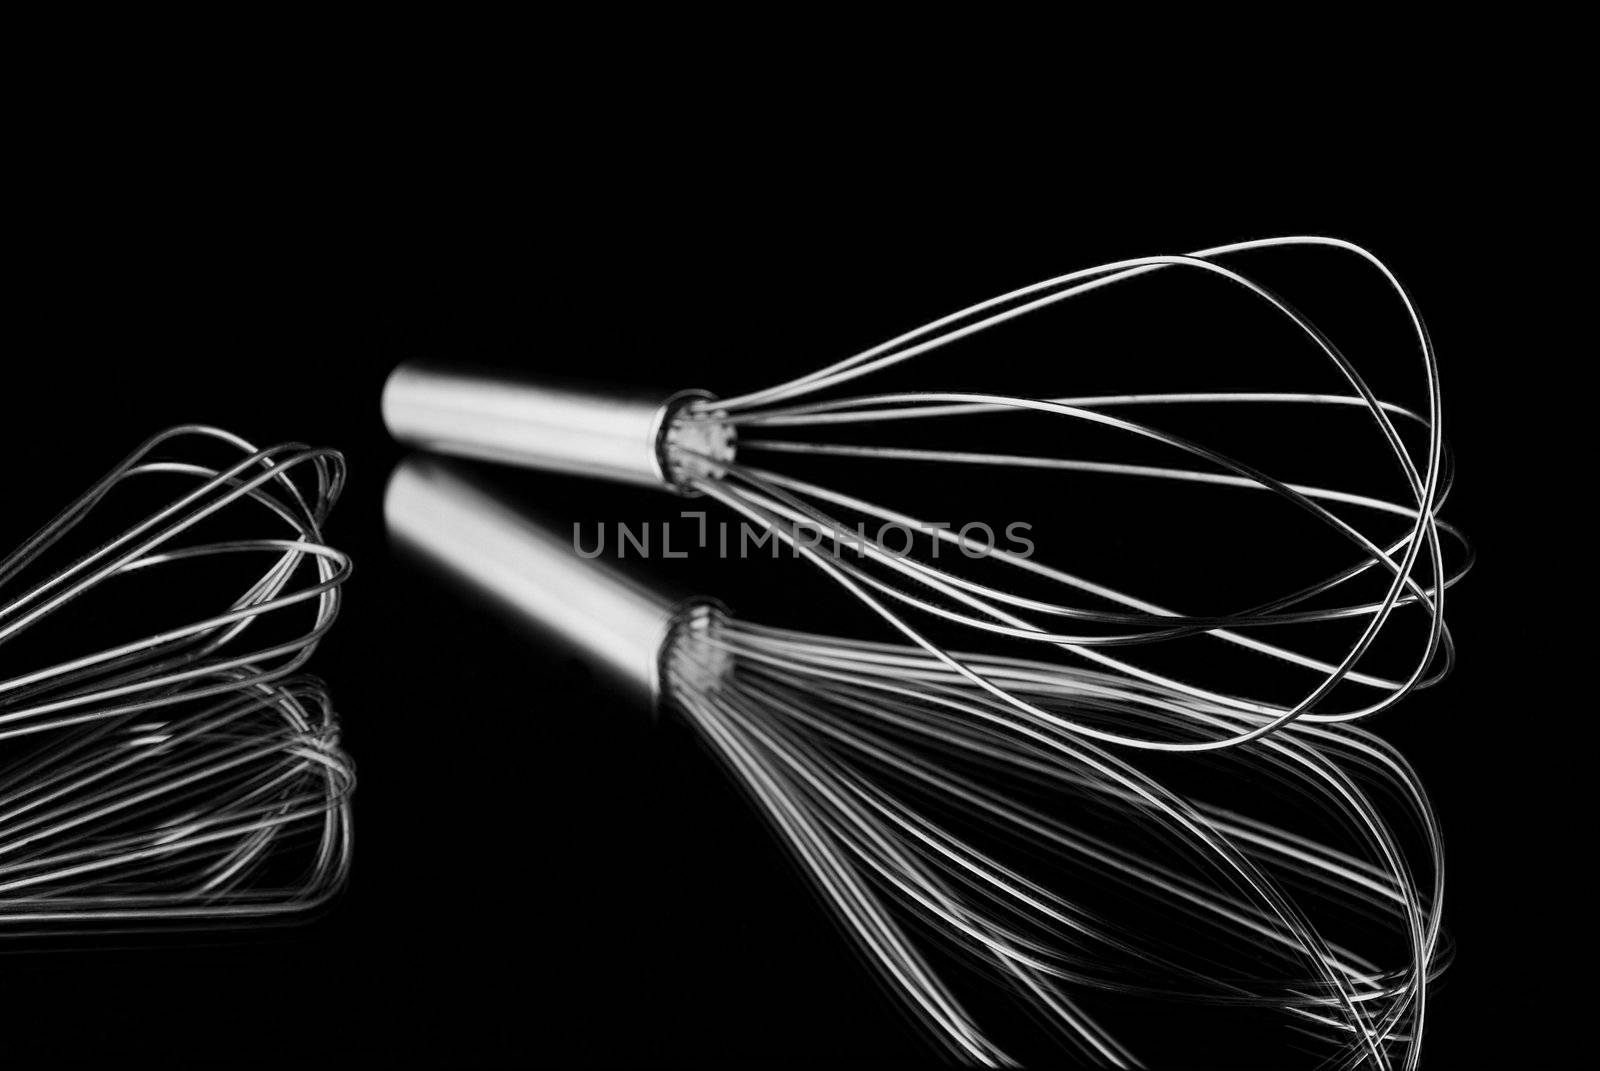 Different sized whisks reflecting on mirror with black background